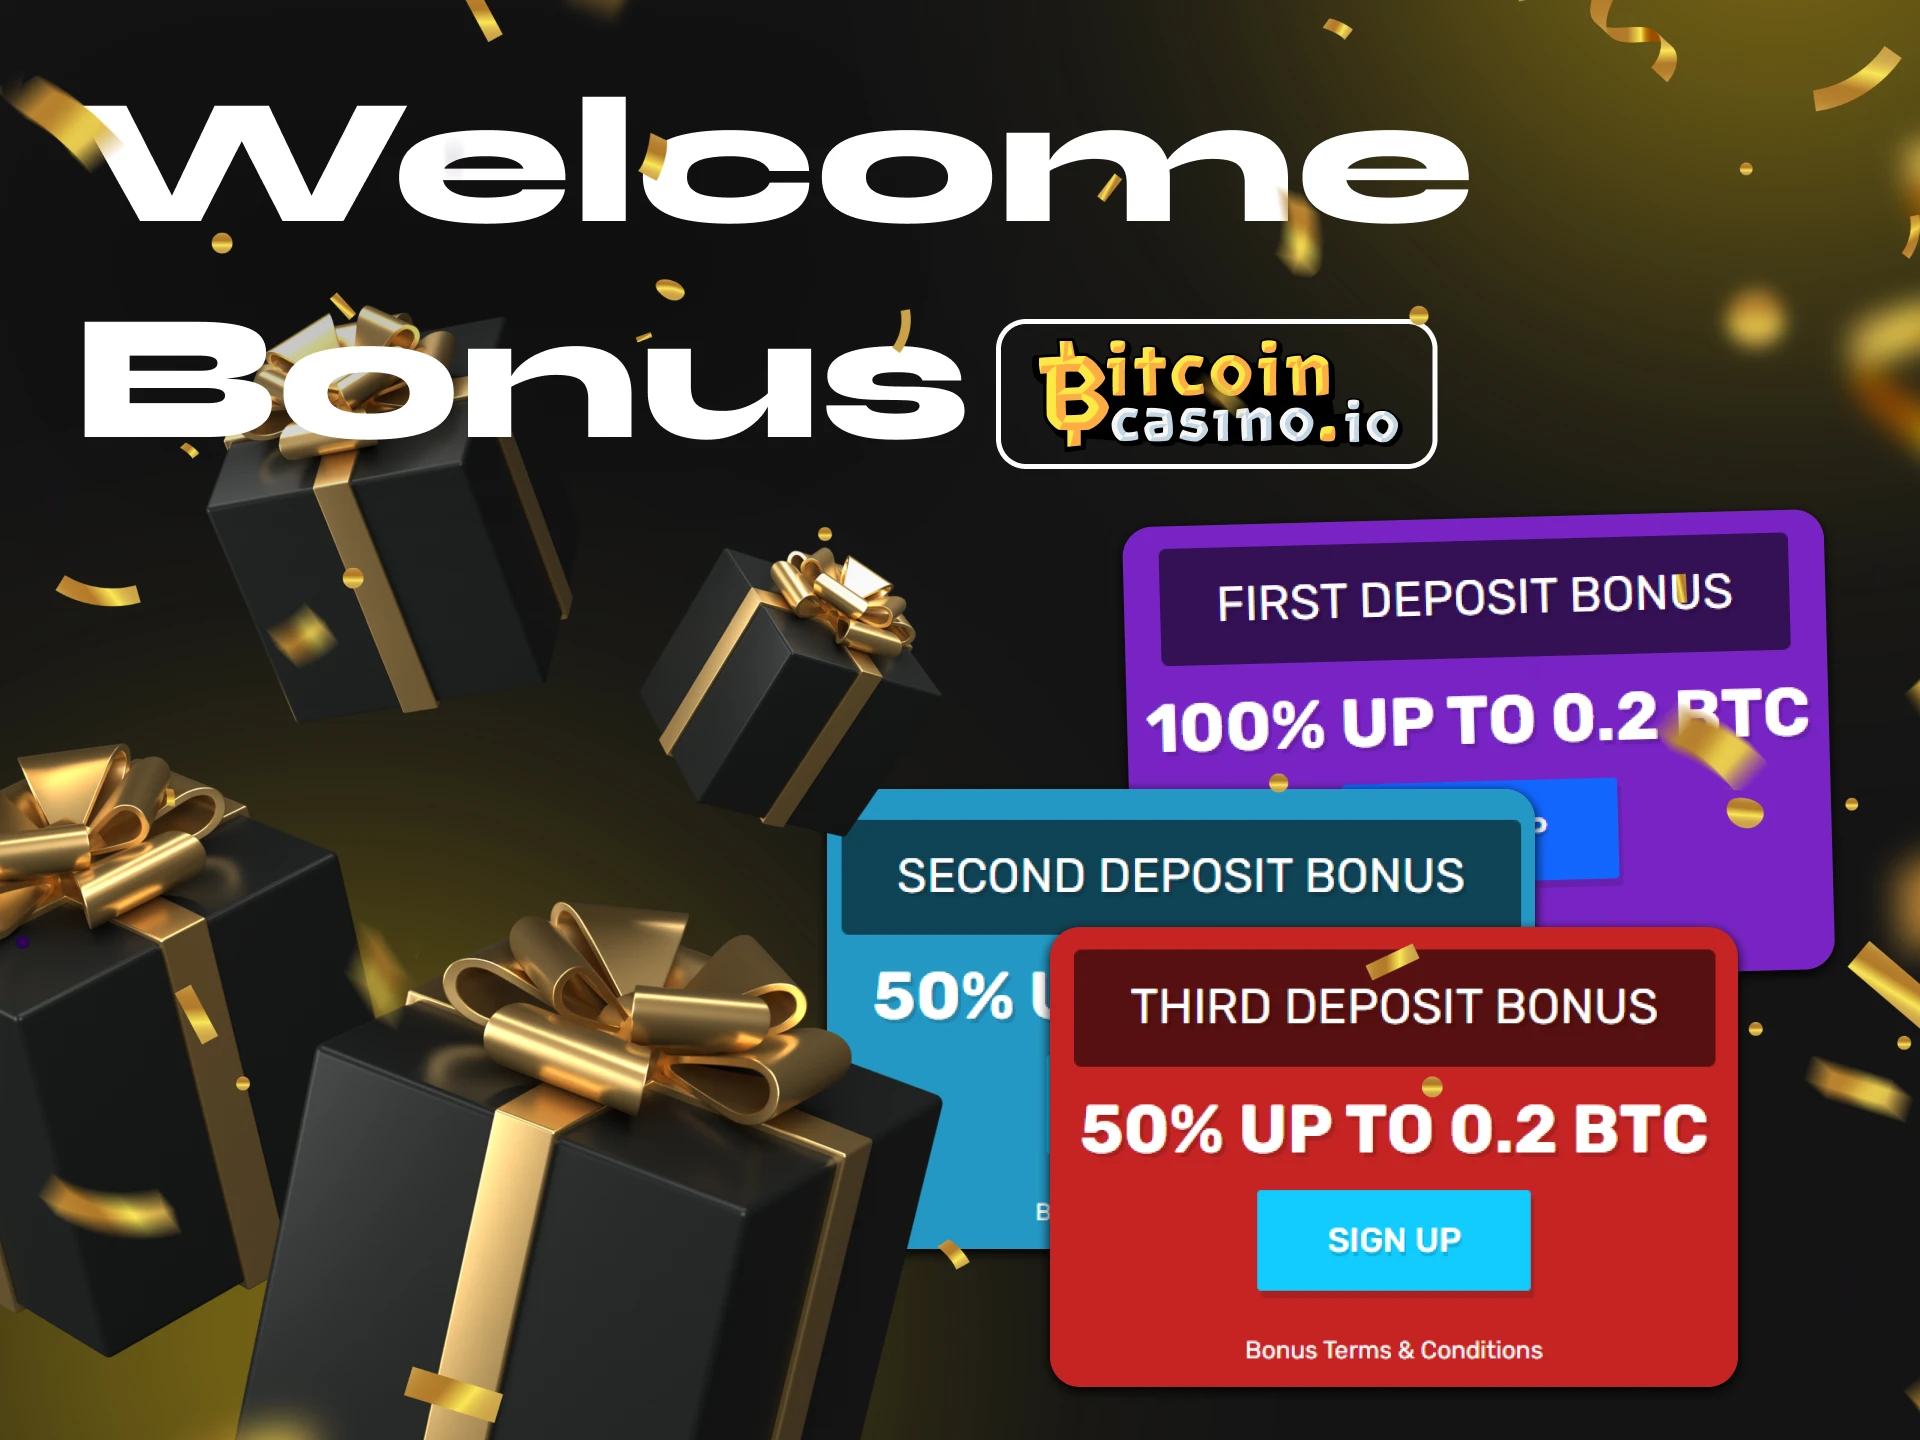 Get the Bitcoincasino welcome bonus and start playing with profit.